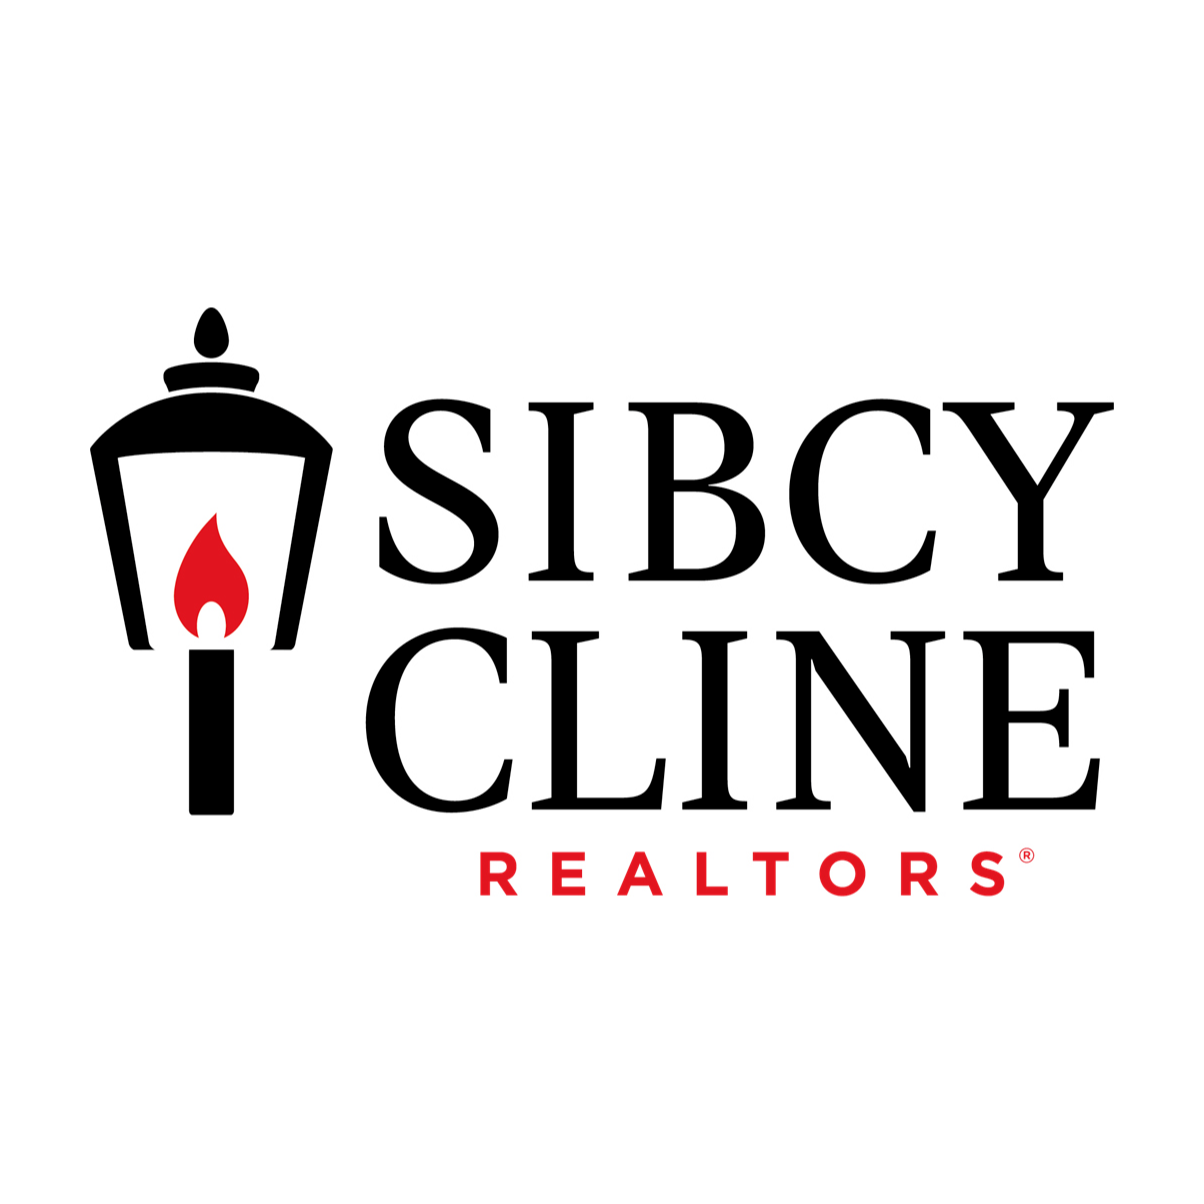 Sibcy Cline Lawrenceburg Office